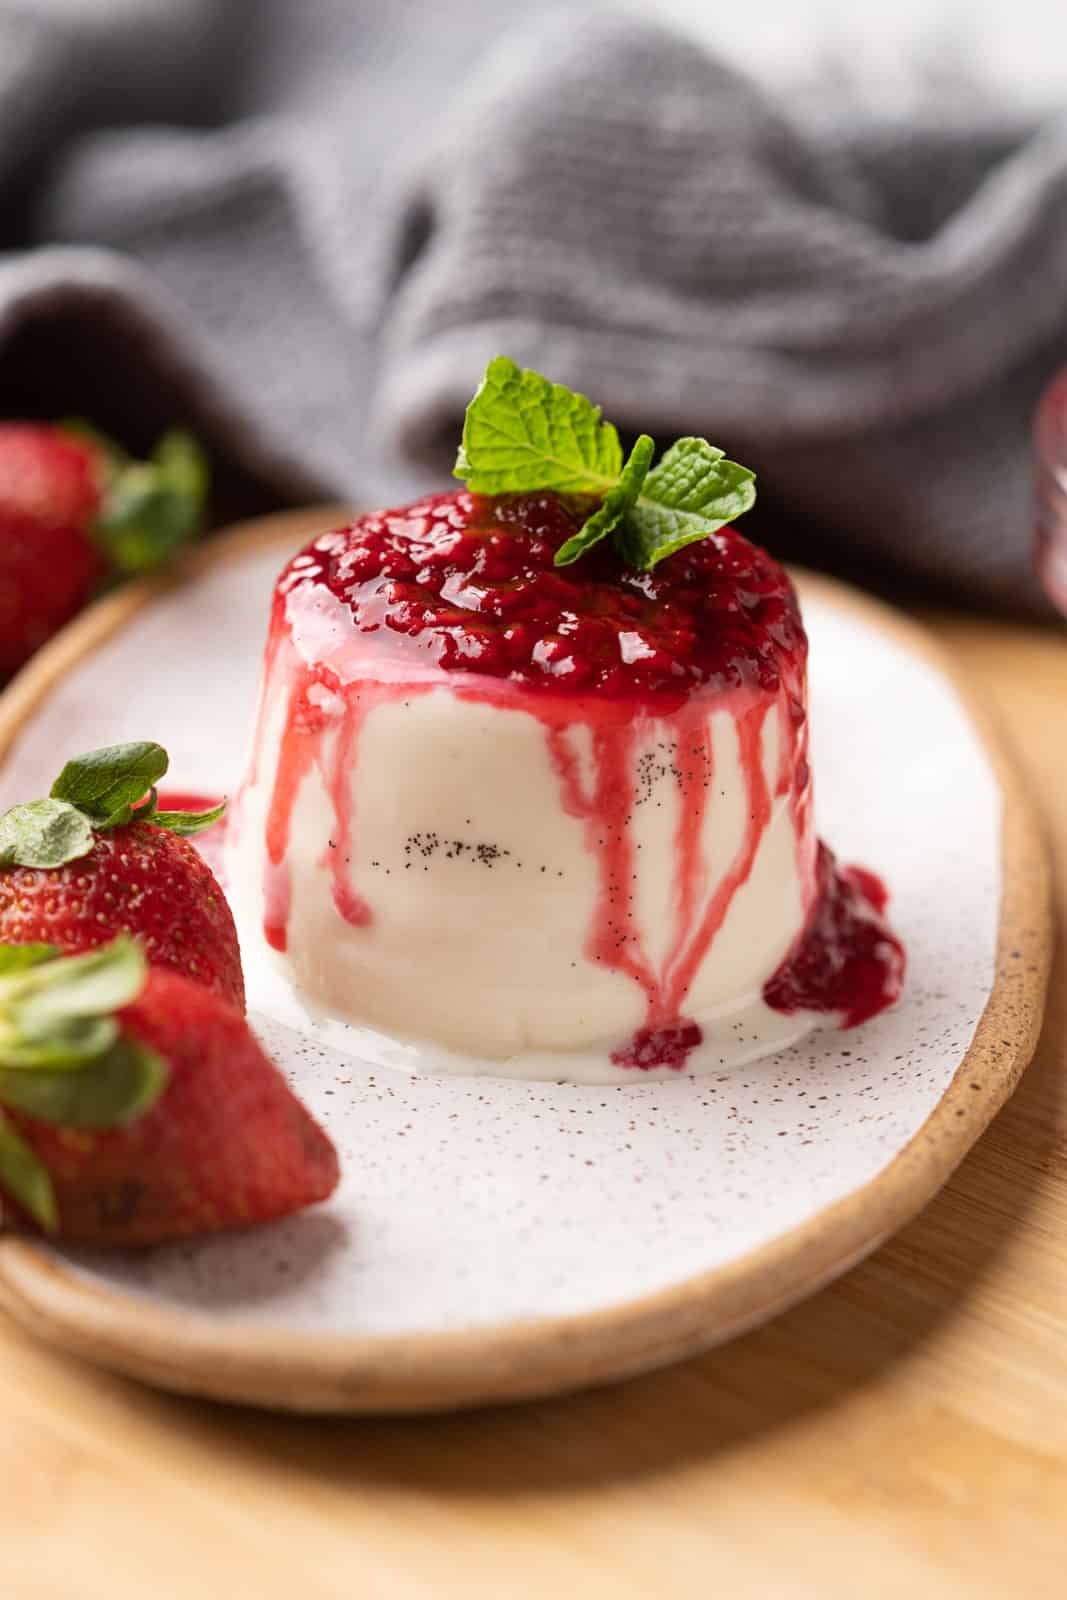 Classic panna cotta with specks of vanilla topped with raspberry coulis served on a white plate